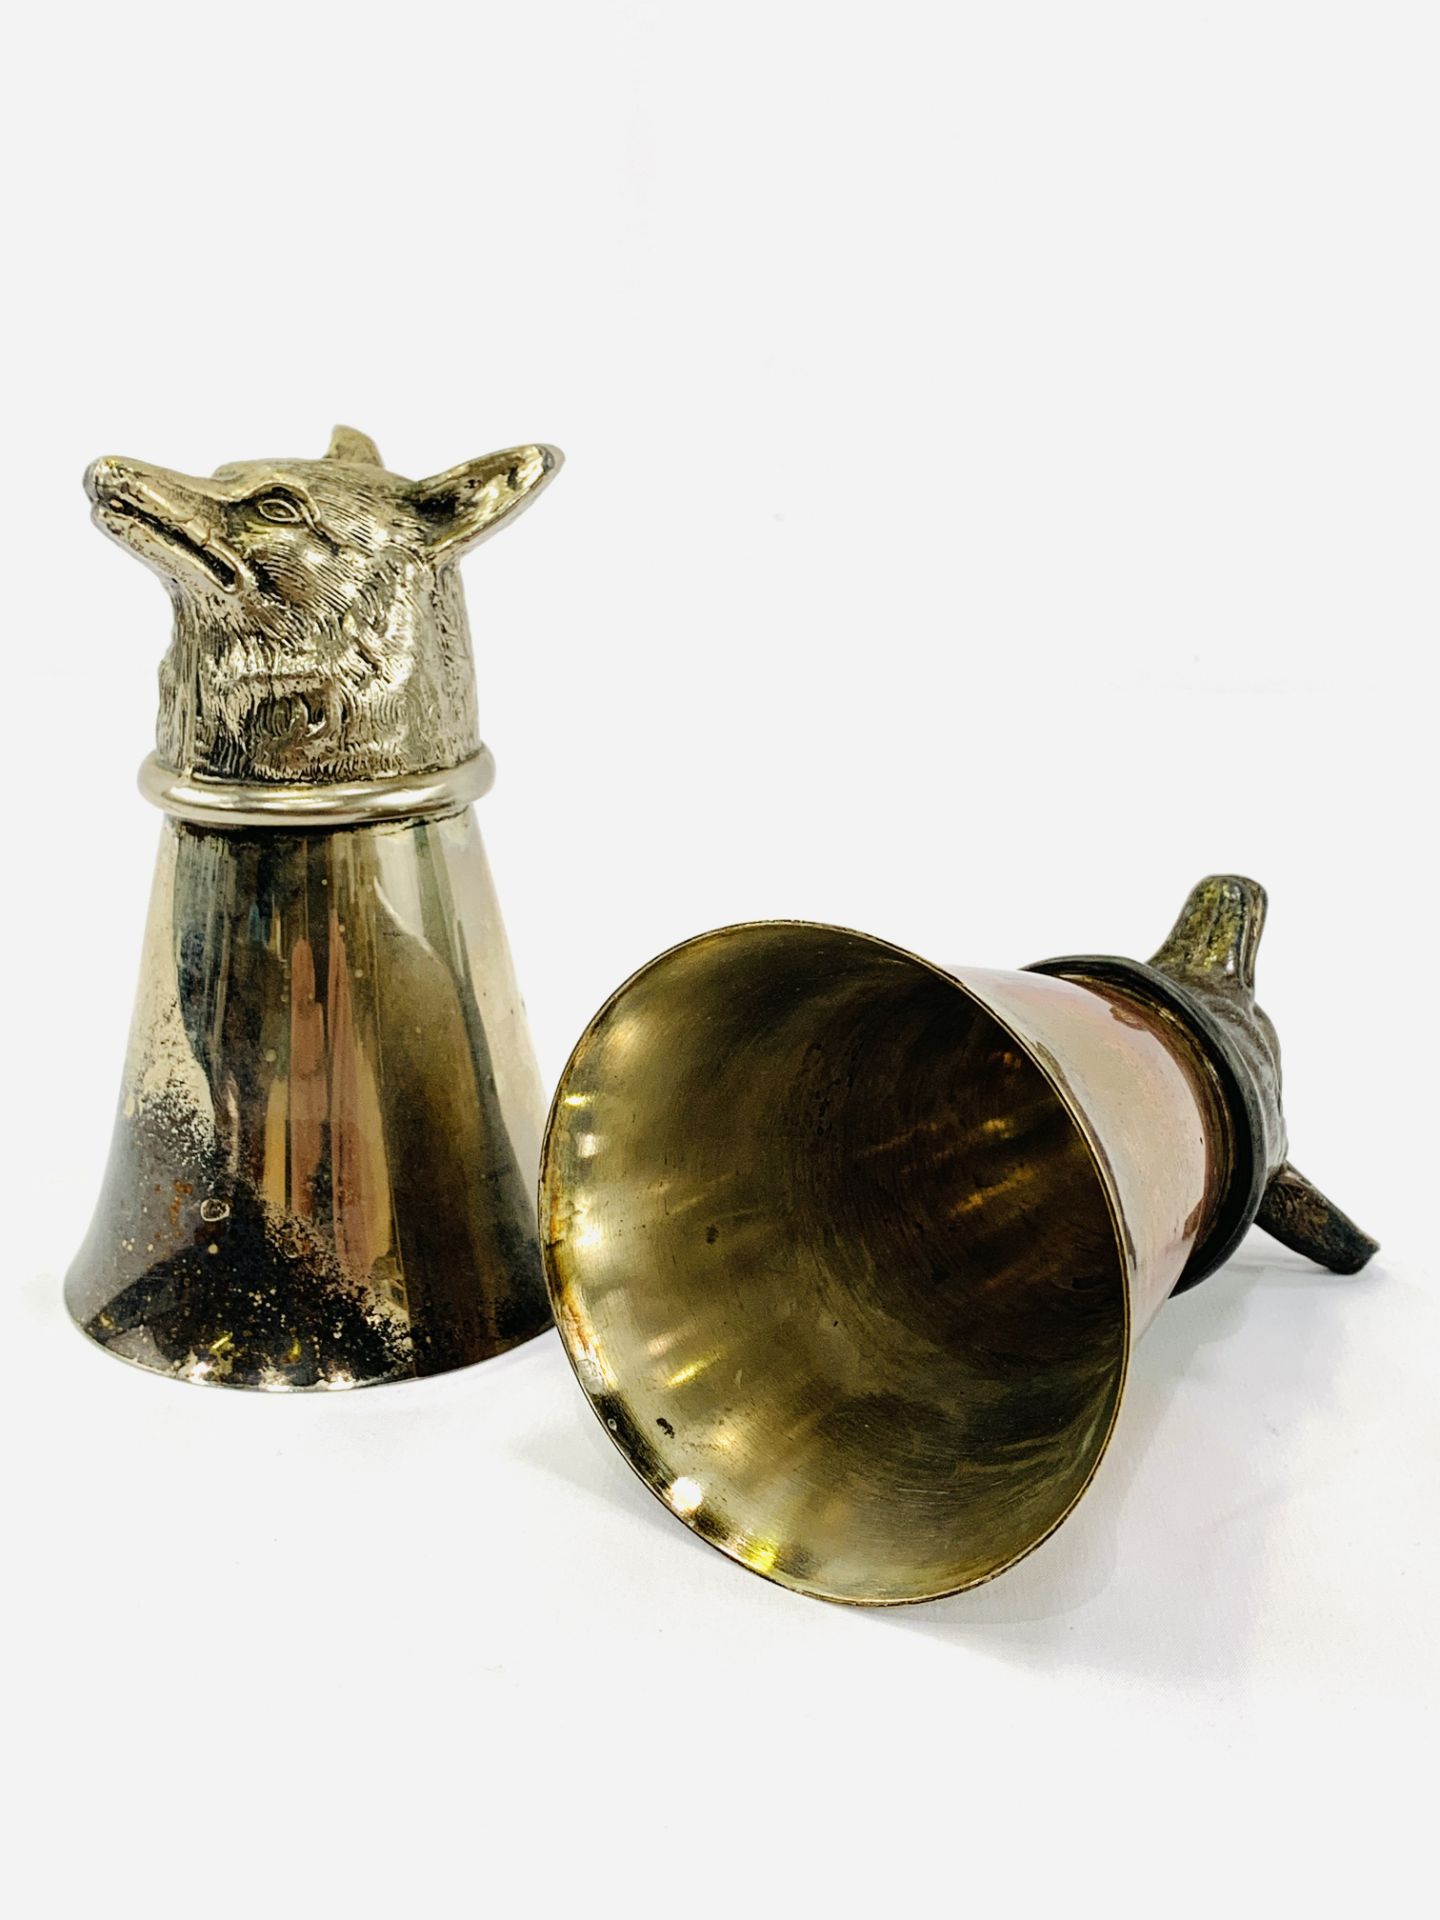 Two silver plate stirrup cups with foxes' heads - Image 5 of 5